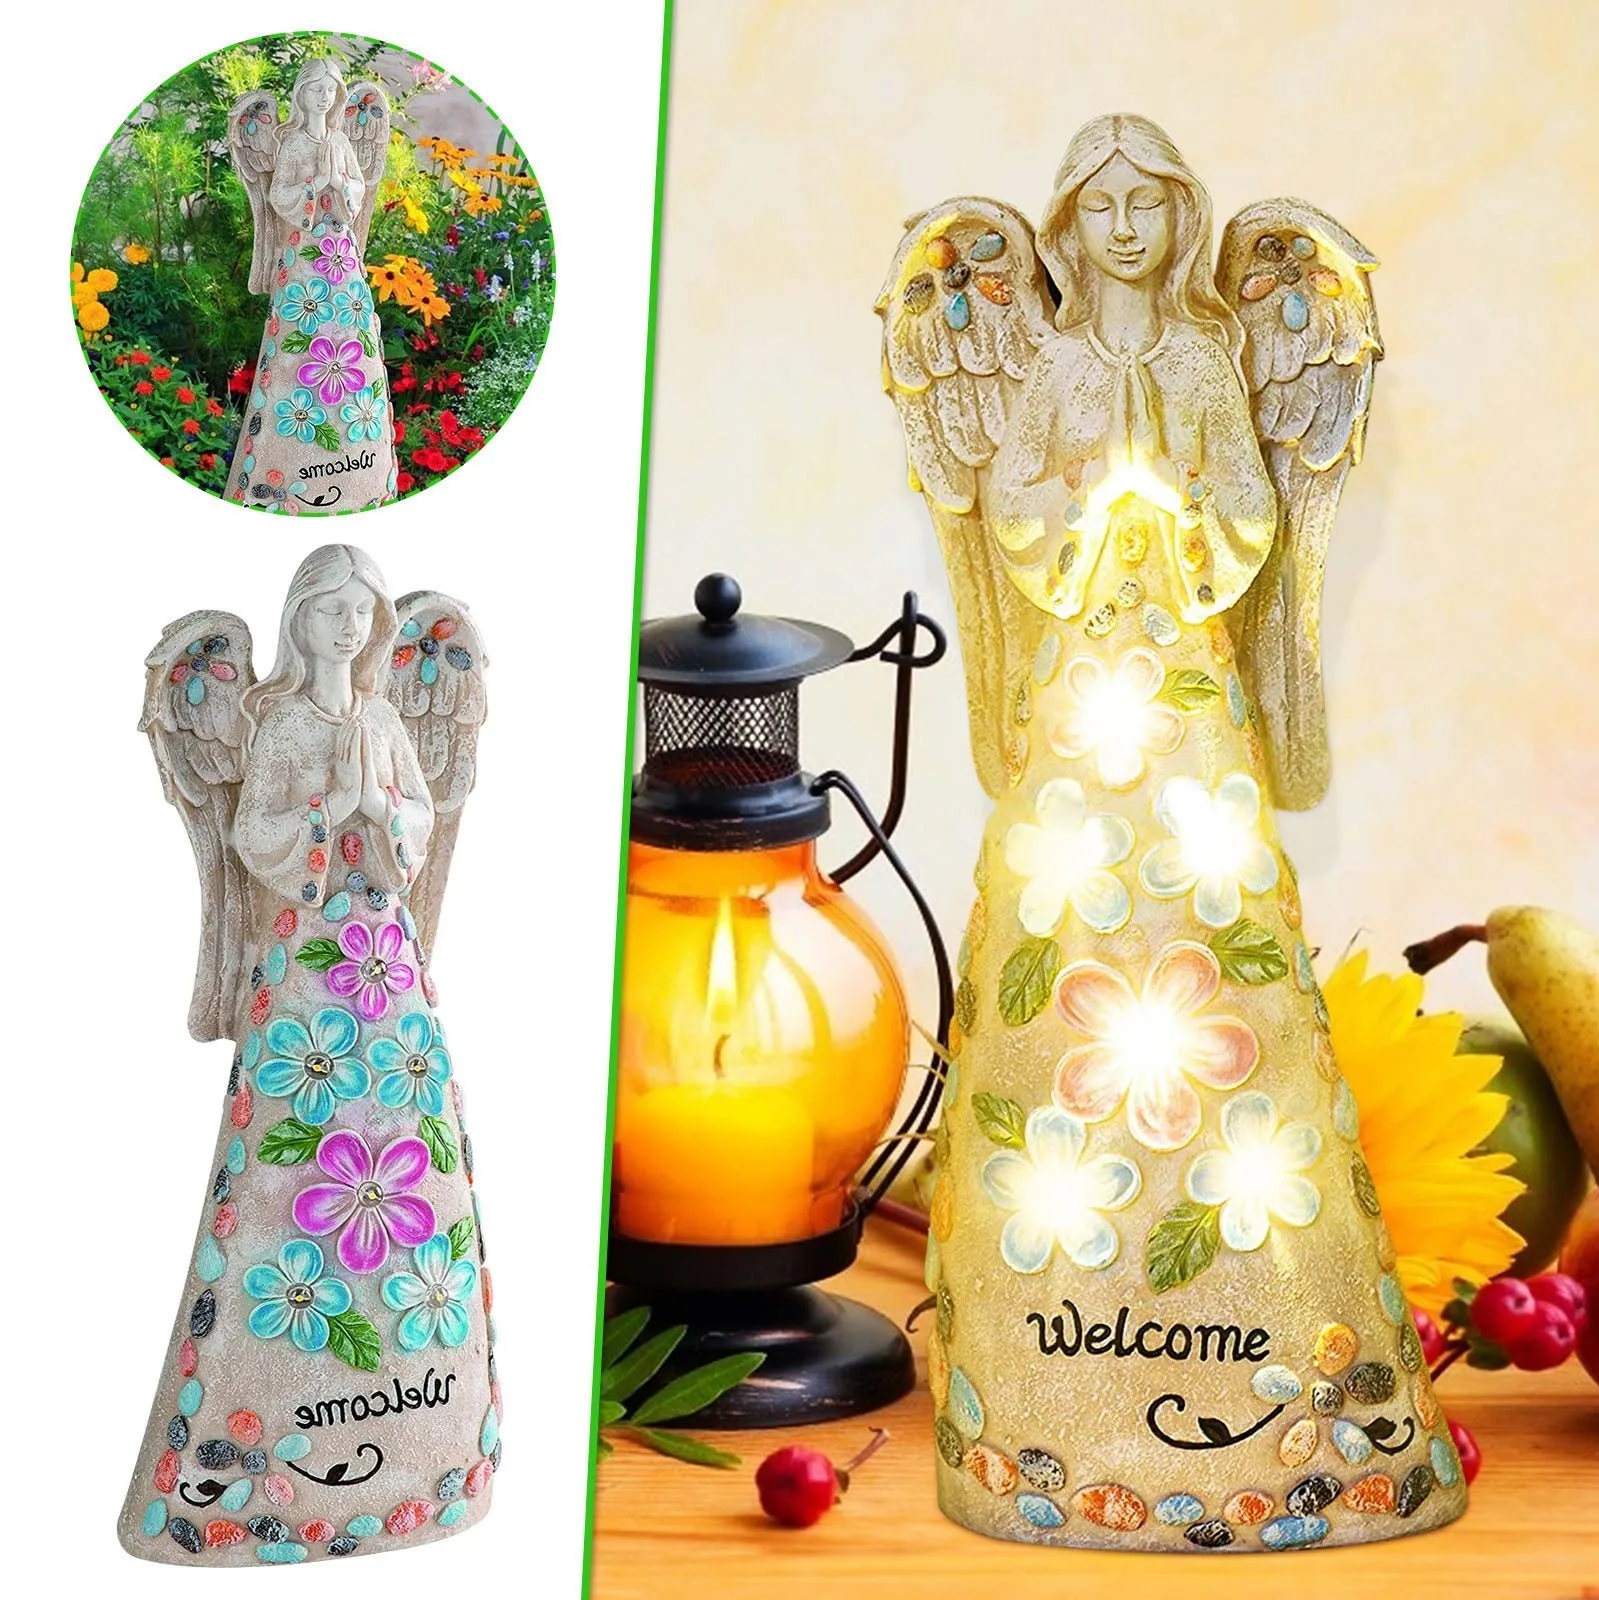 Sun Energy Angel Resin Lamp Led Angel Statue, Garden Decoration Angel Statue  Household Ornament Decoration Accessories Lamp|Figurines & Miniatures| -  AliExpress